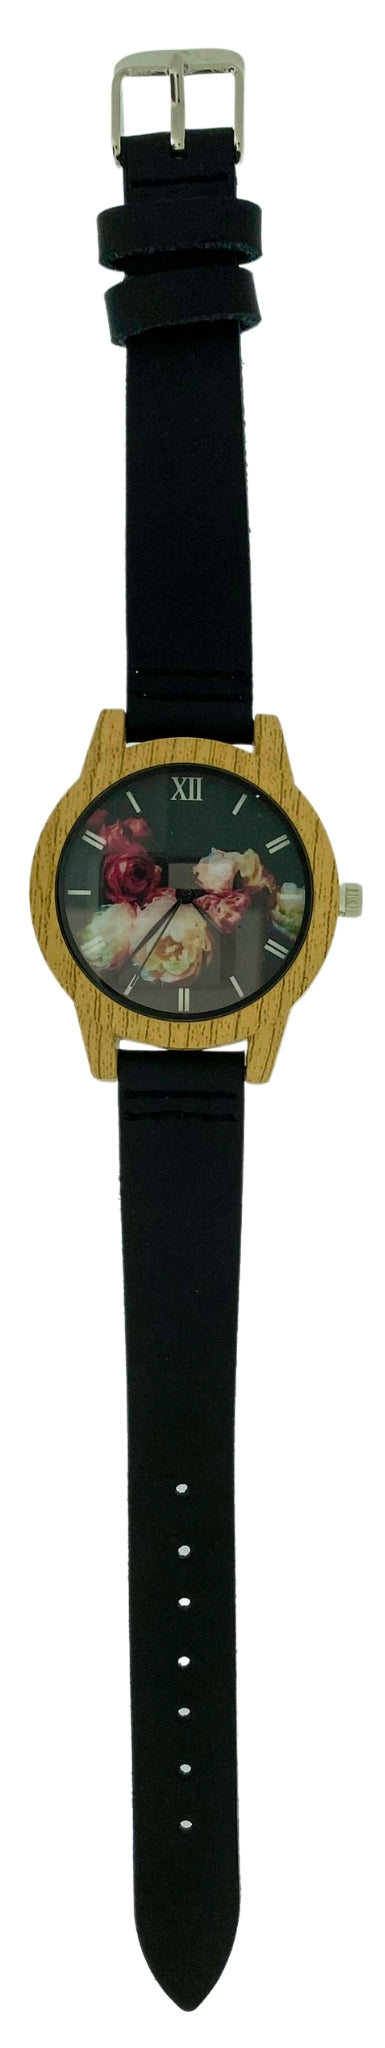 Watch with patterned face